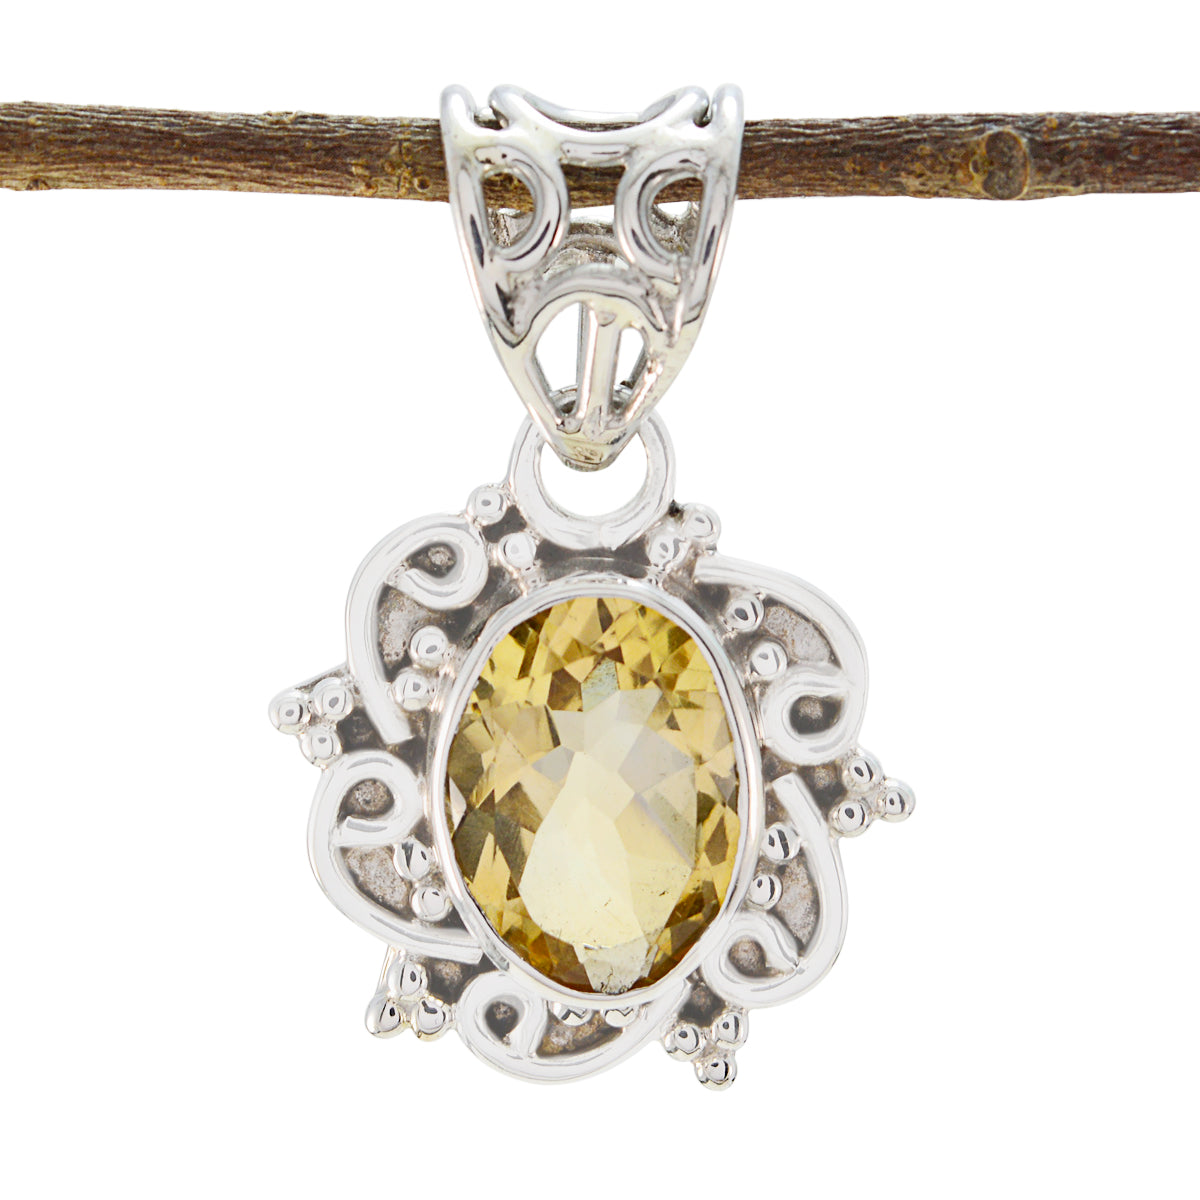 Riyo Natural Gemstone Oval Faceted Yellow Citrine 925 Silver Pendant cyber Monday gift